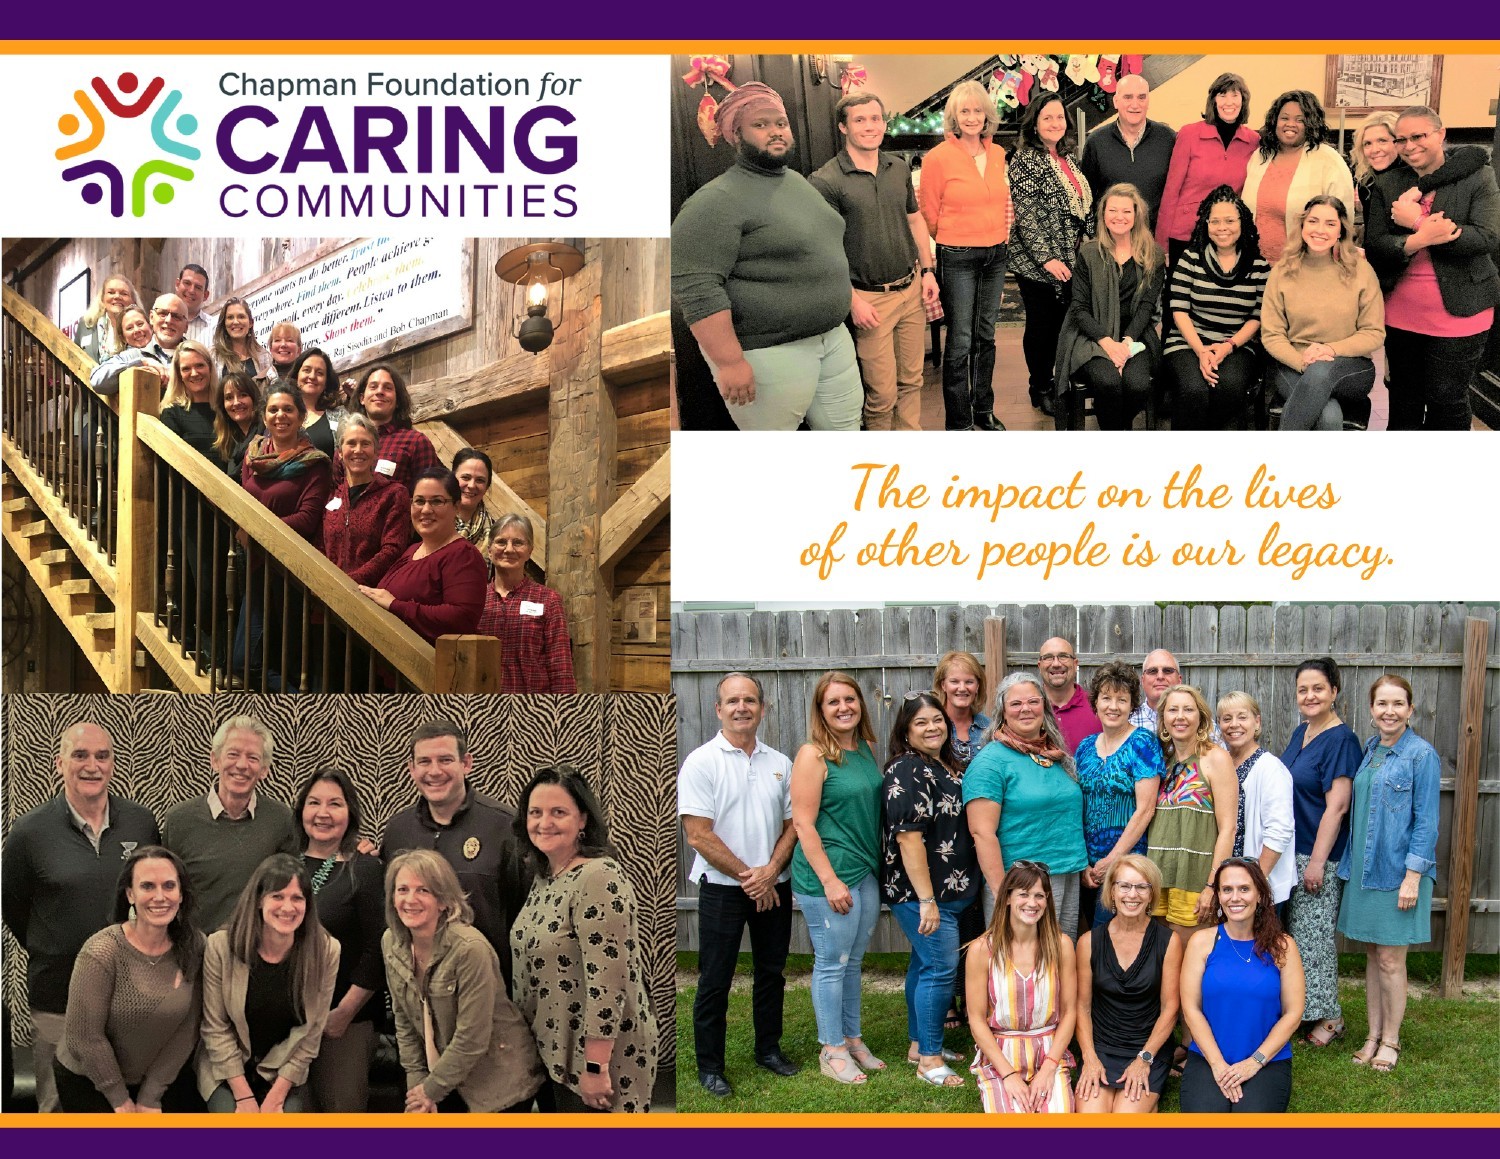 The Chapman Foundation for Caring Communities has five regional learning hubs making an impact across the US. 